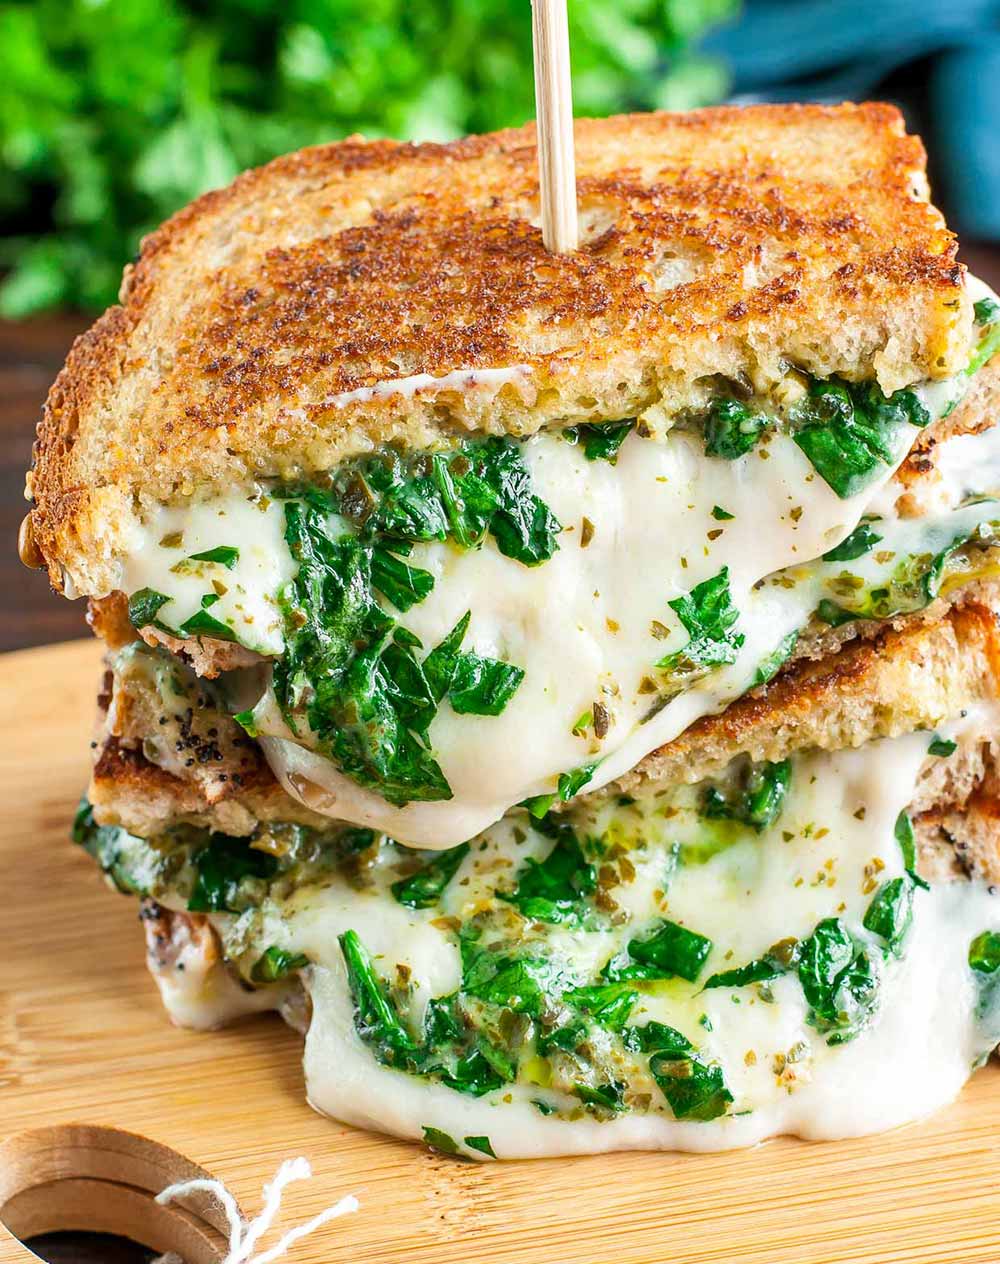 21 Mind-Blowing Grilled Cheese Sandwich Recipes: Easy Cheesy Vegan Spinach Pesto Grilled Cheese